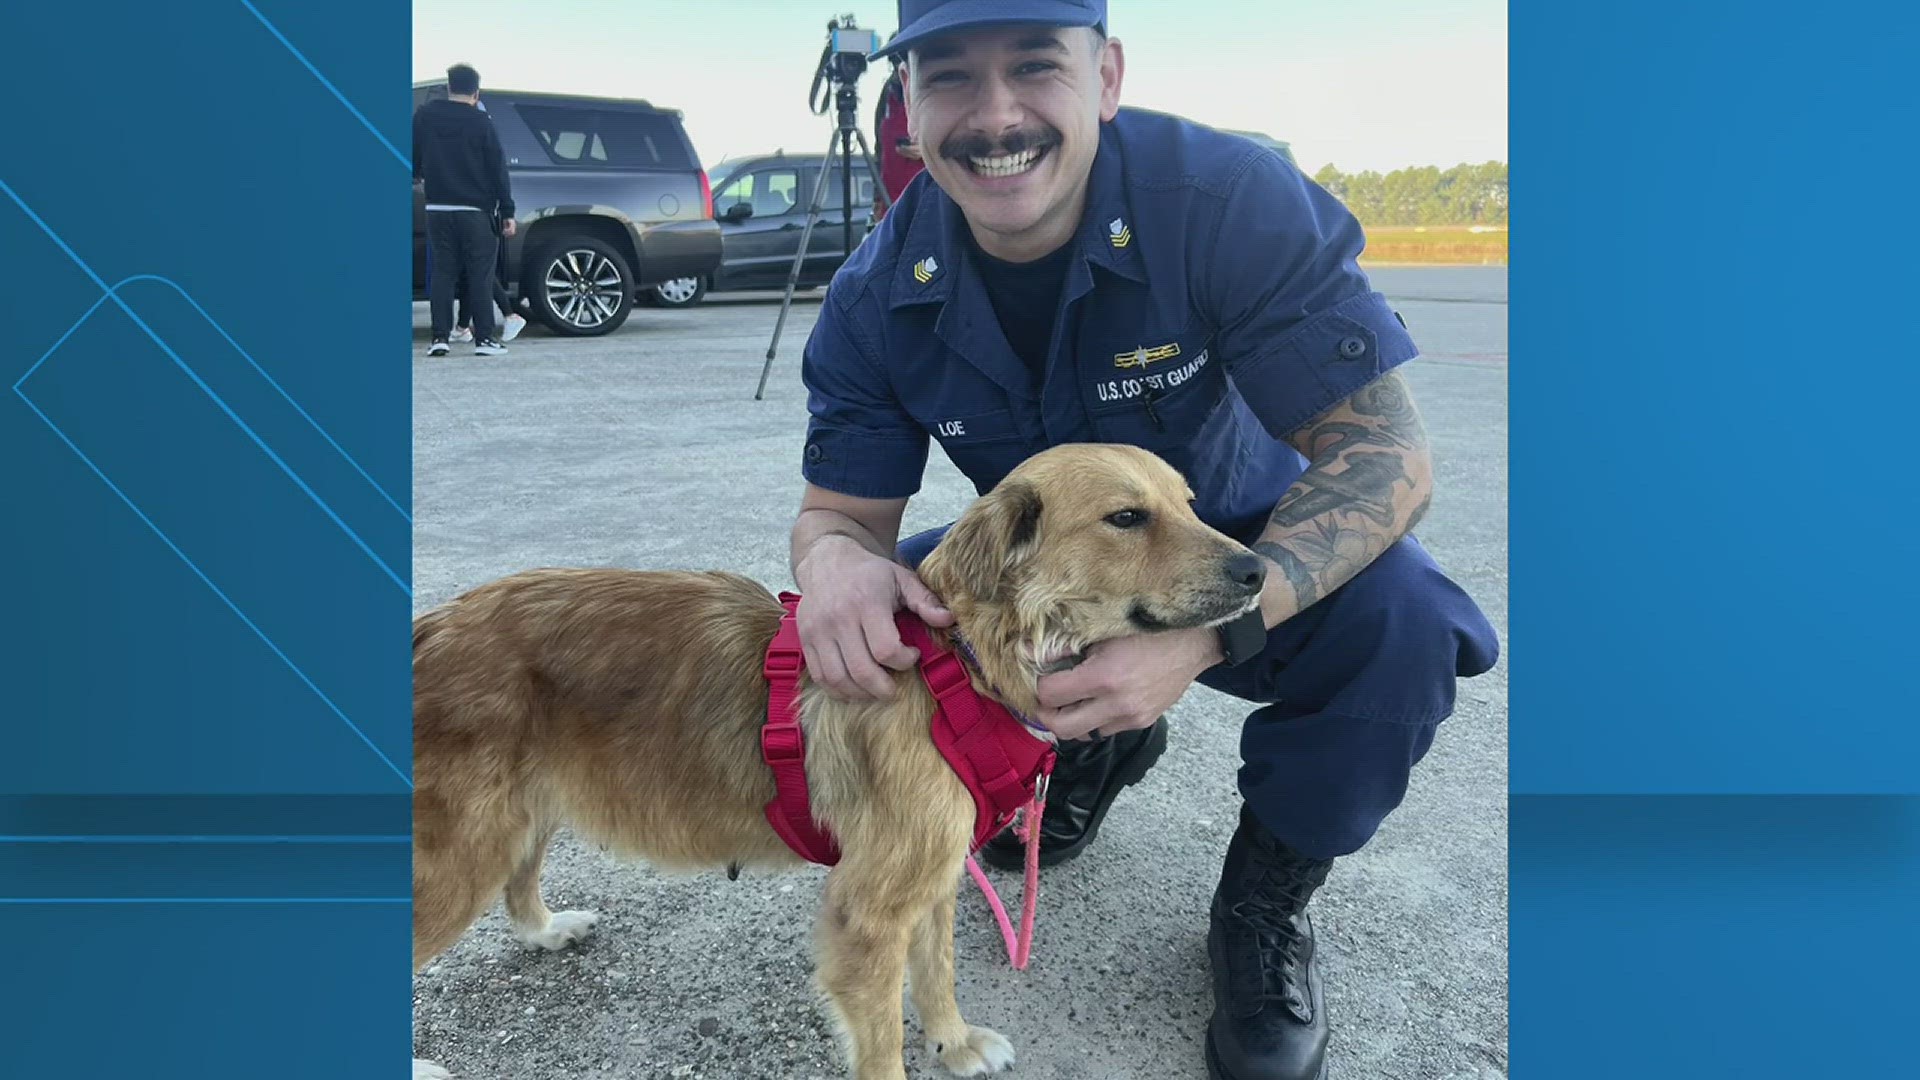 They do most of the job, we just support them': Rescue dogs saved